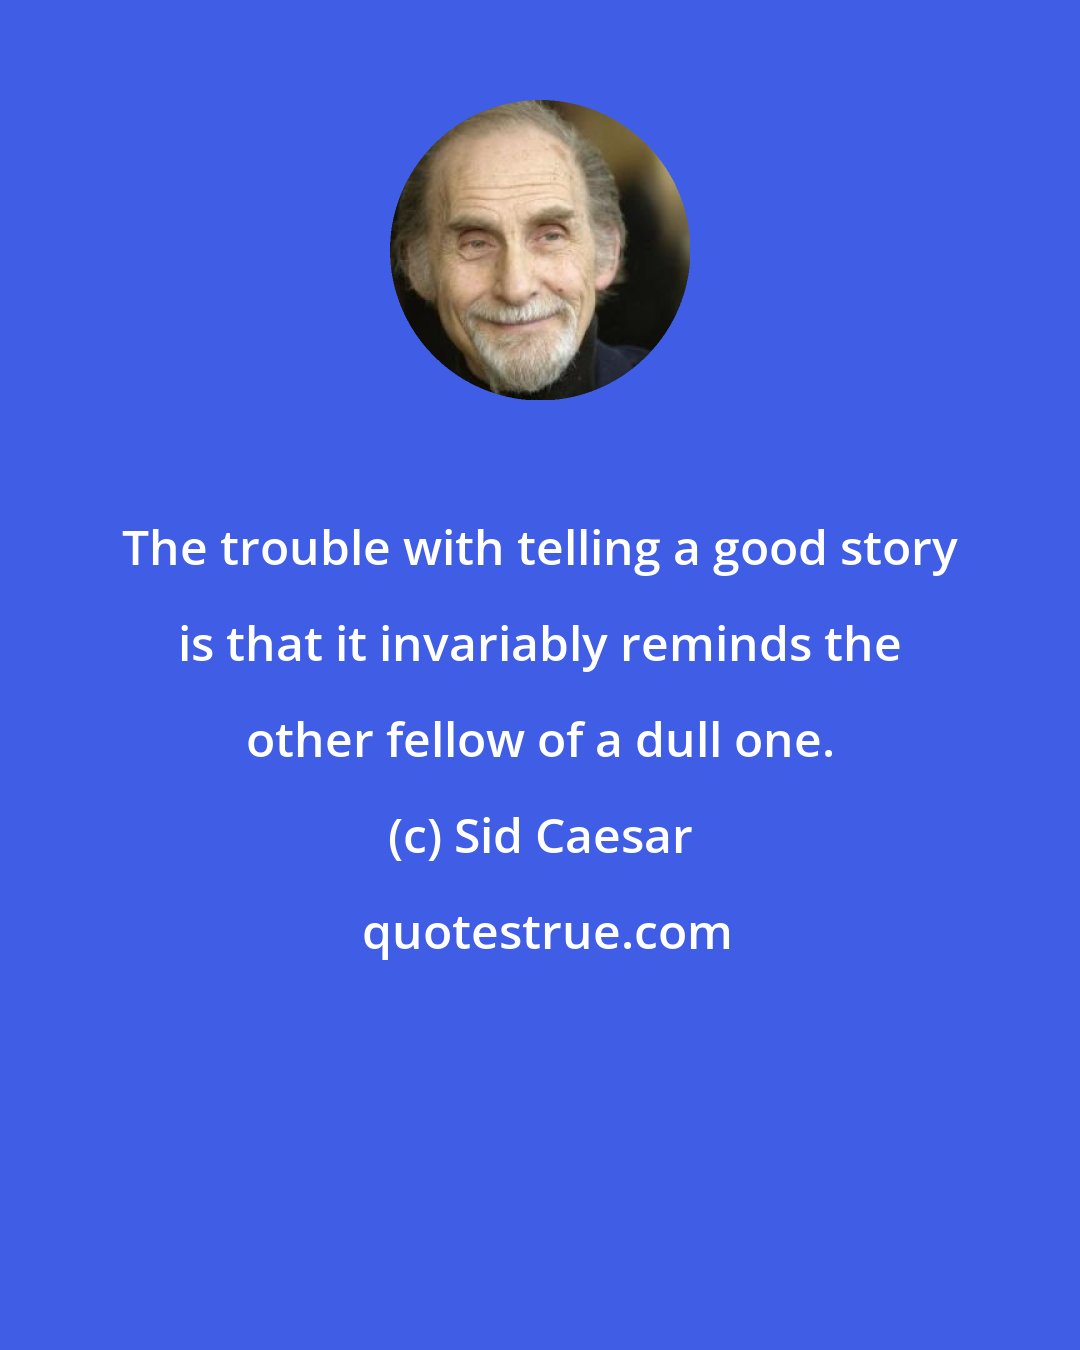 Sid Caesar: The trouble with telling a good story is that it invariably reminds the other fellow of a dull one.